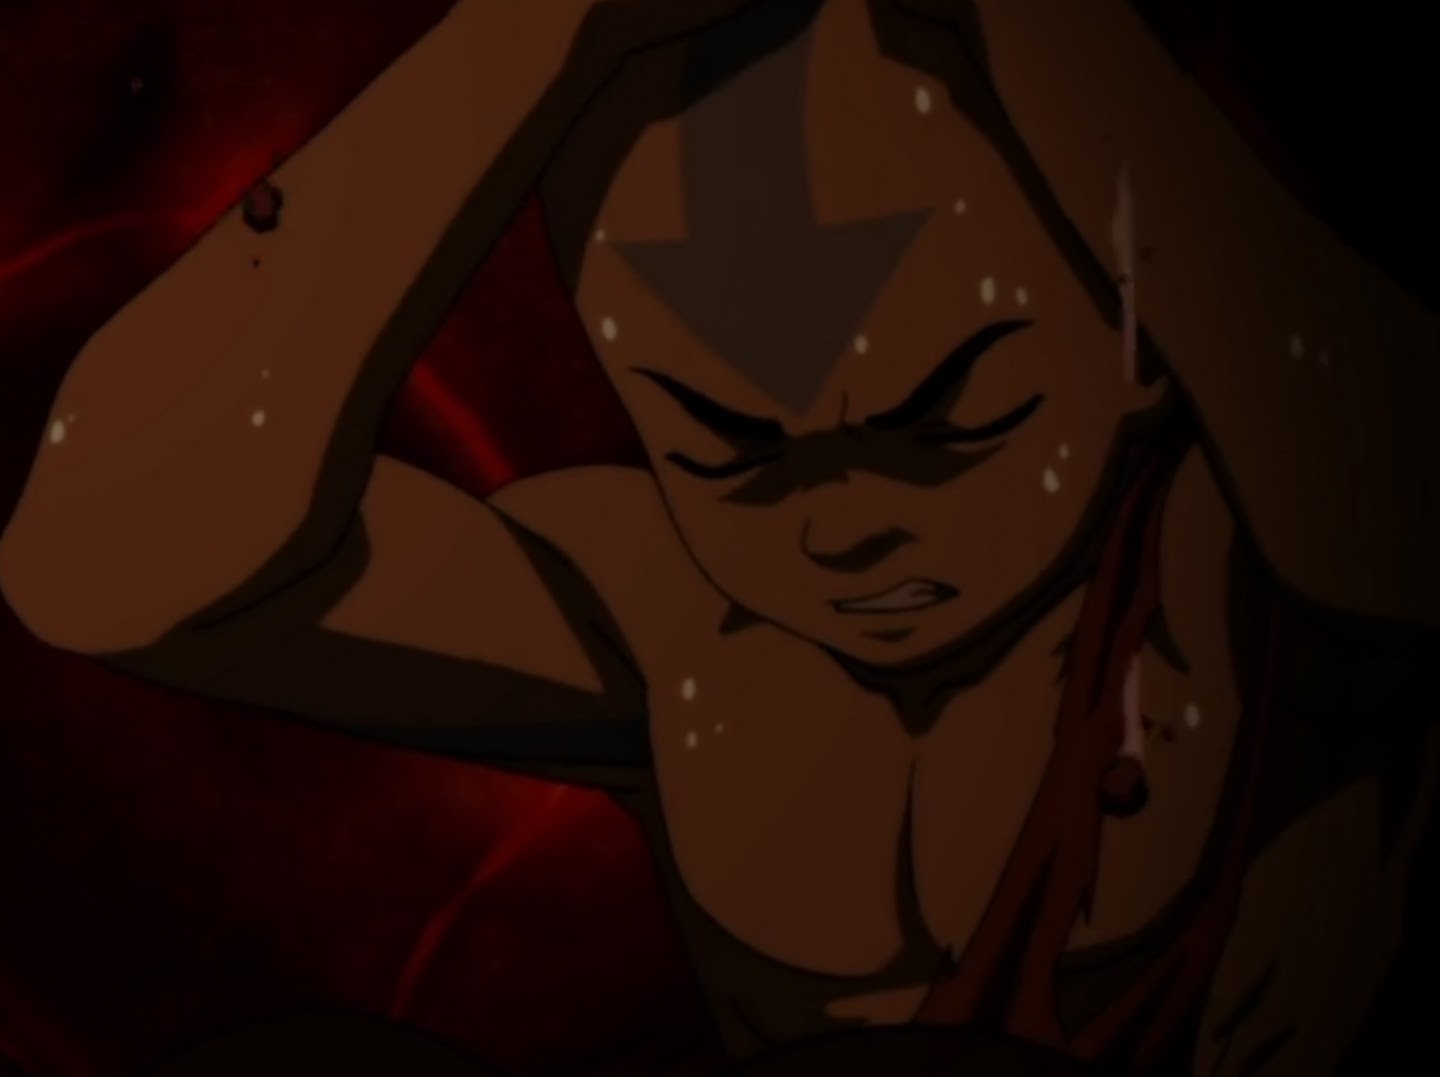 Aang armors himself in rock to escape Ozai's flame attacks. 